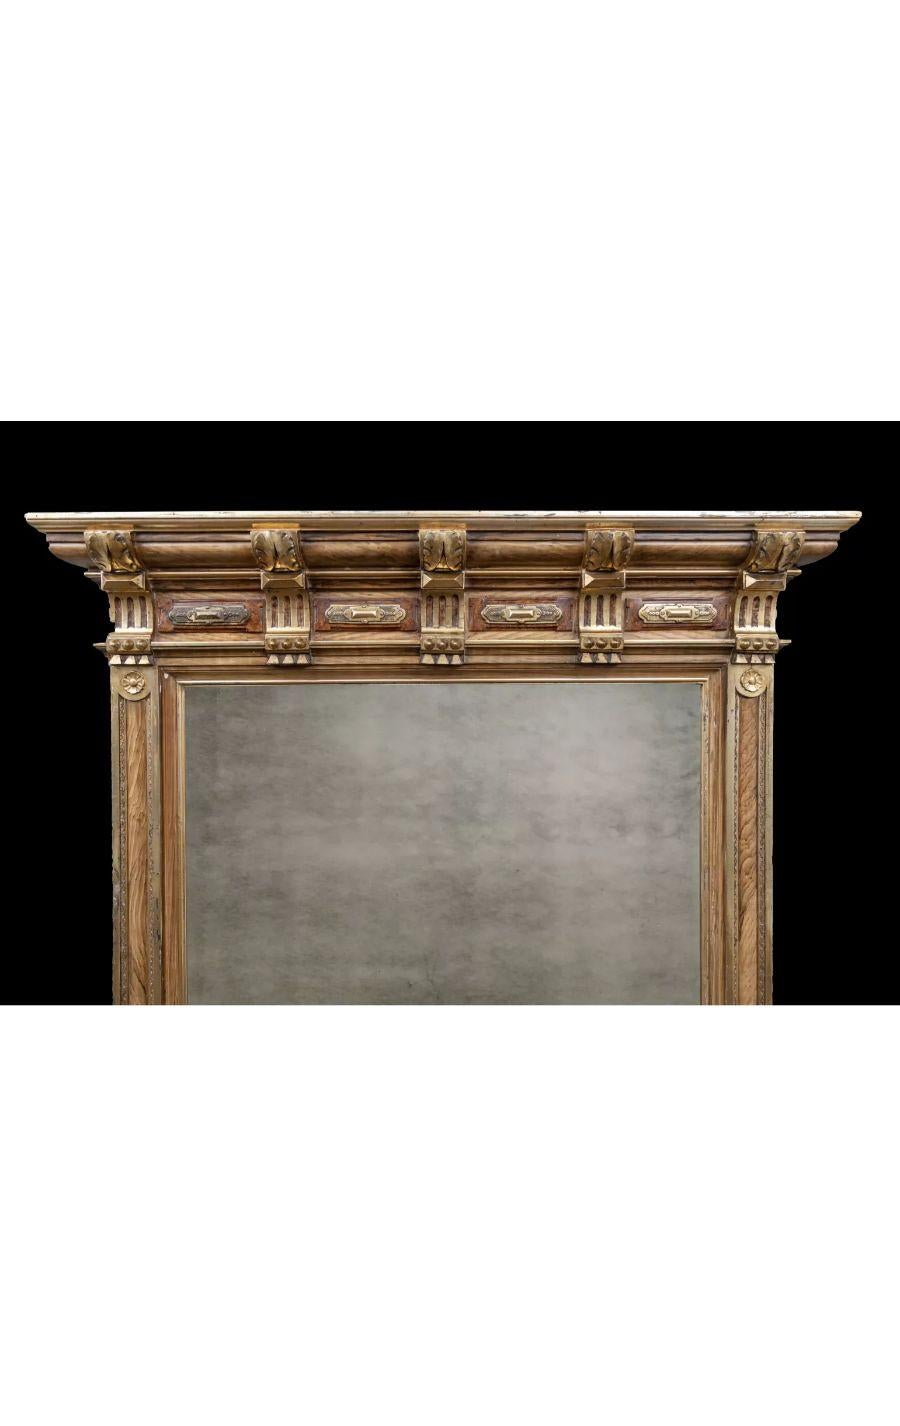 A tall antique French mirror in the Napoleon III style.

With original wood-grain effect and burnished gold-gilt frame. 

Original plate glass mirror in good condition.

Circa 1860

Additional information:
Measurements:
Width: 52